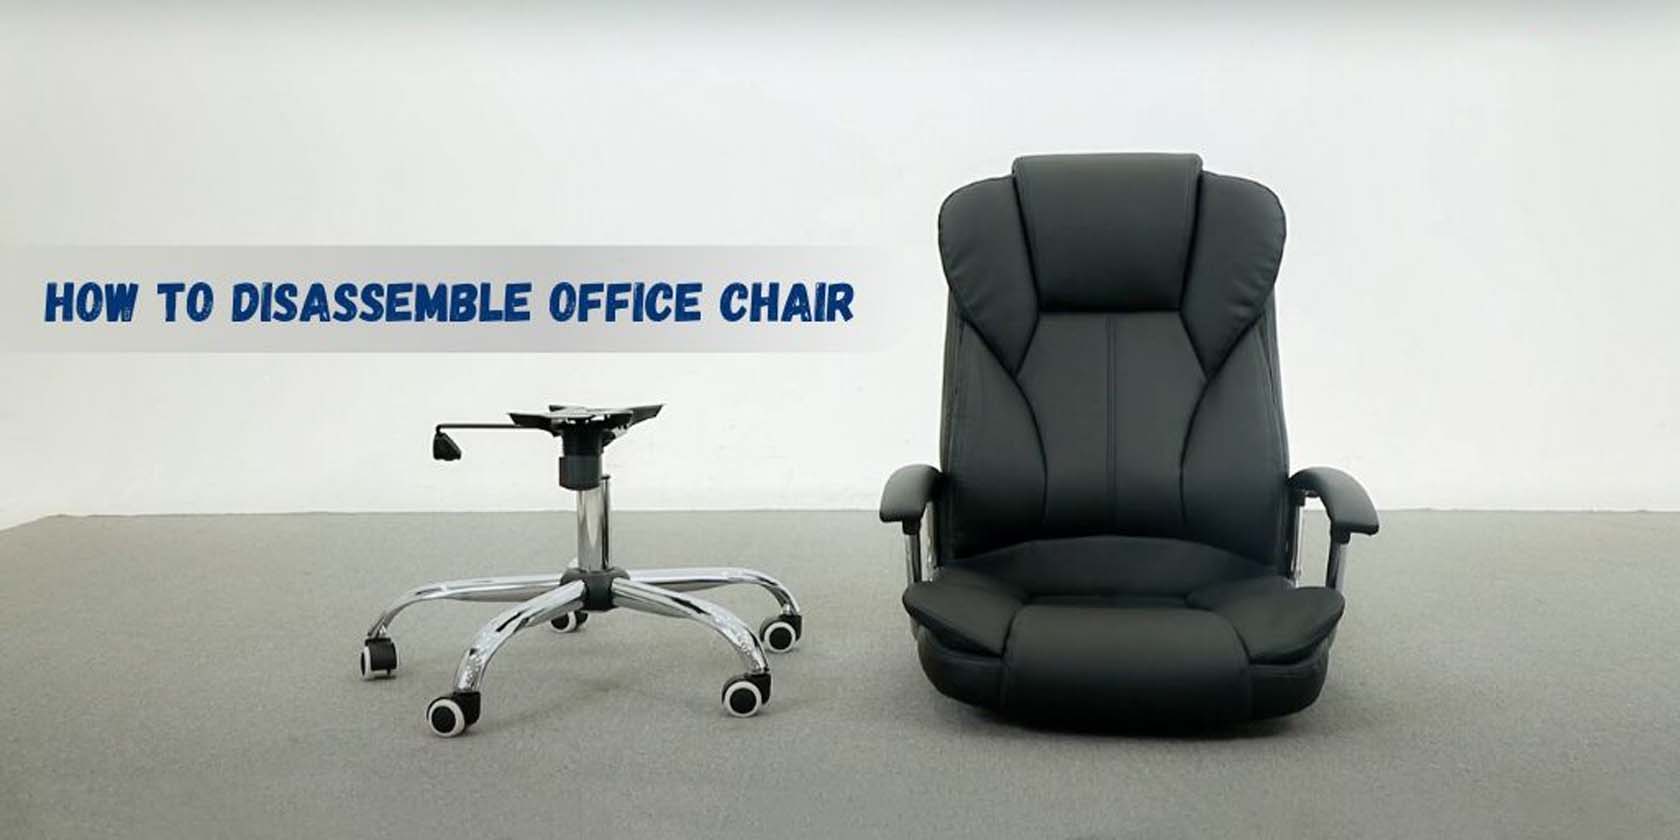 How To Disassemble An Office Chair